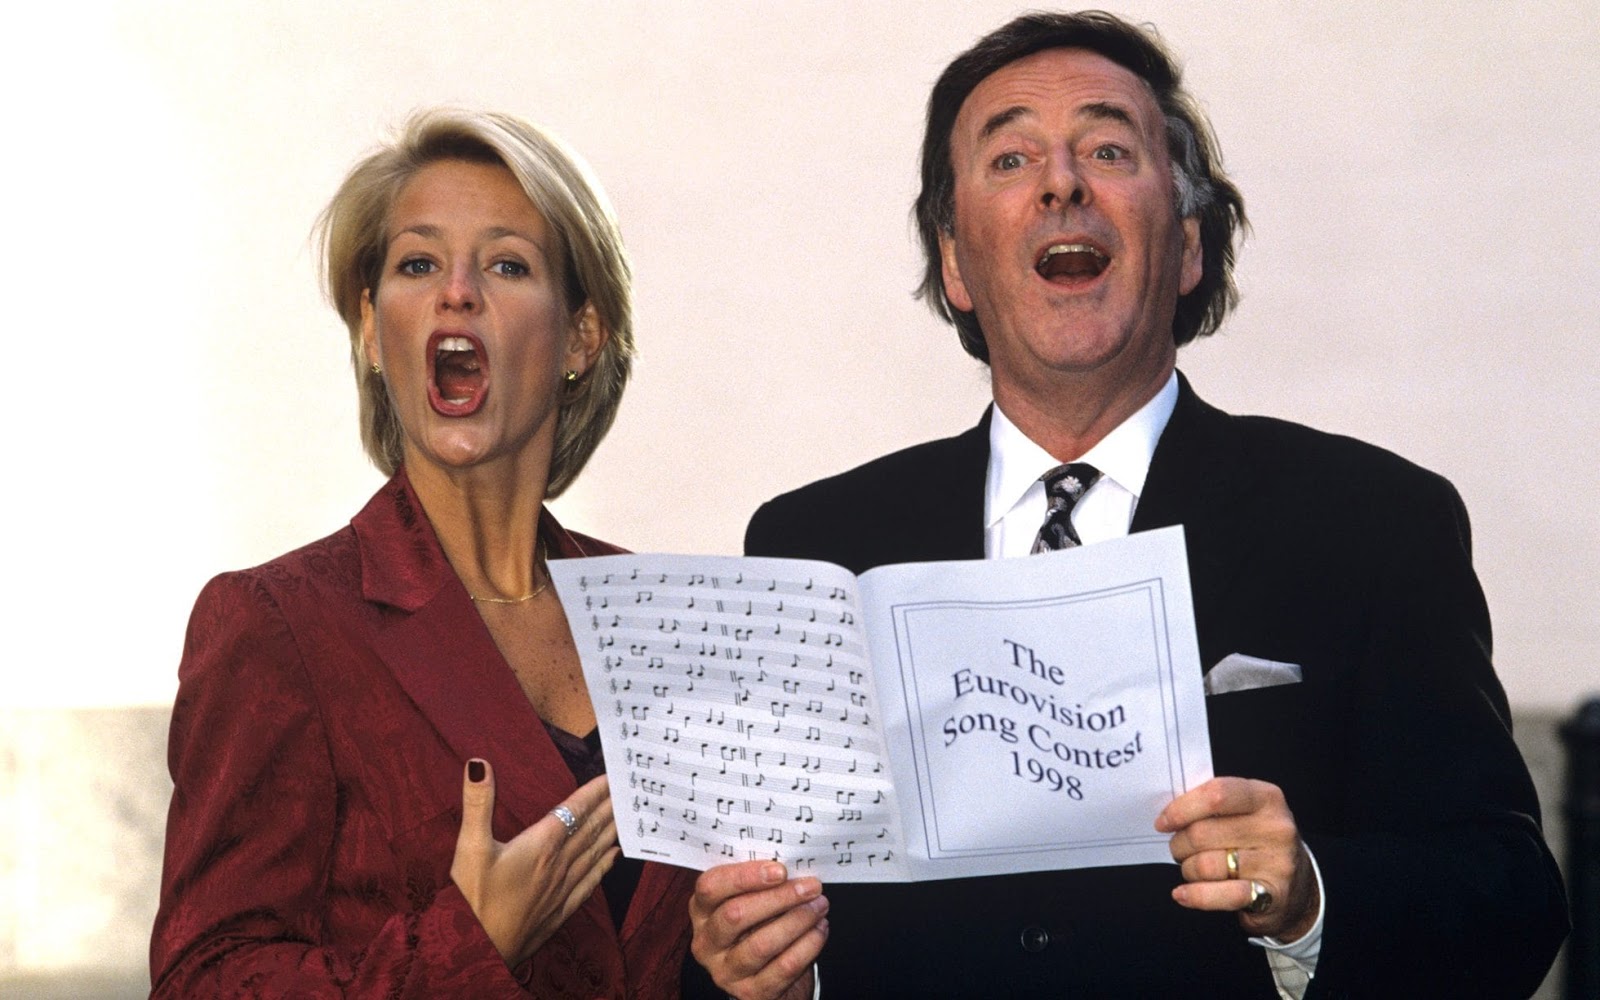 Ulrika's TV presenter career allowed her to work with Melanie Sykes and Sir Terry Wogan (right)